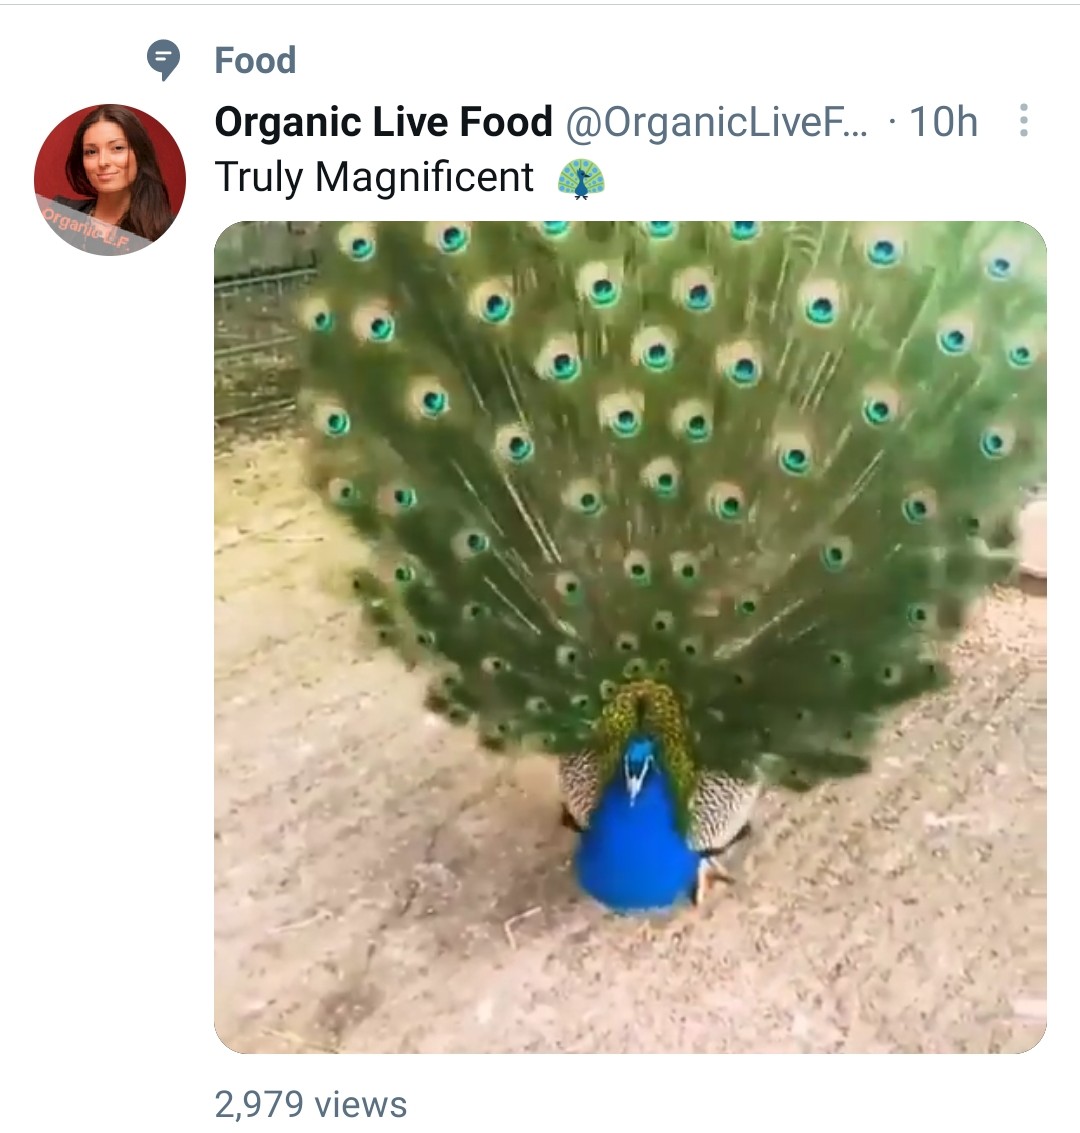 can I eat a peacock? @Twitter https://t.co/LNoaXq2BCp